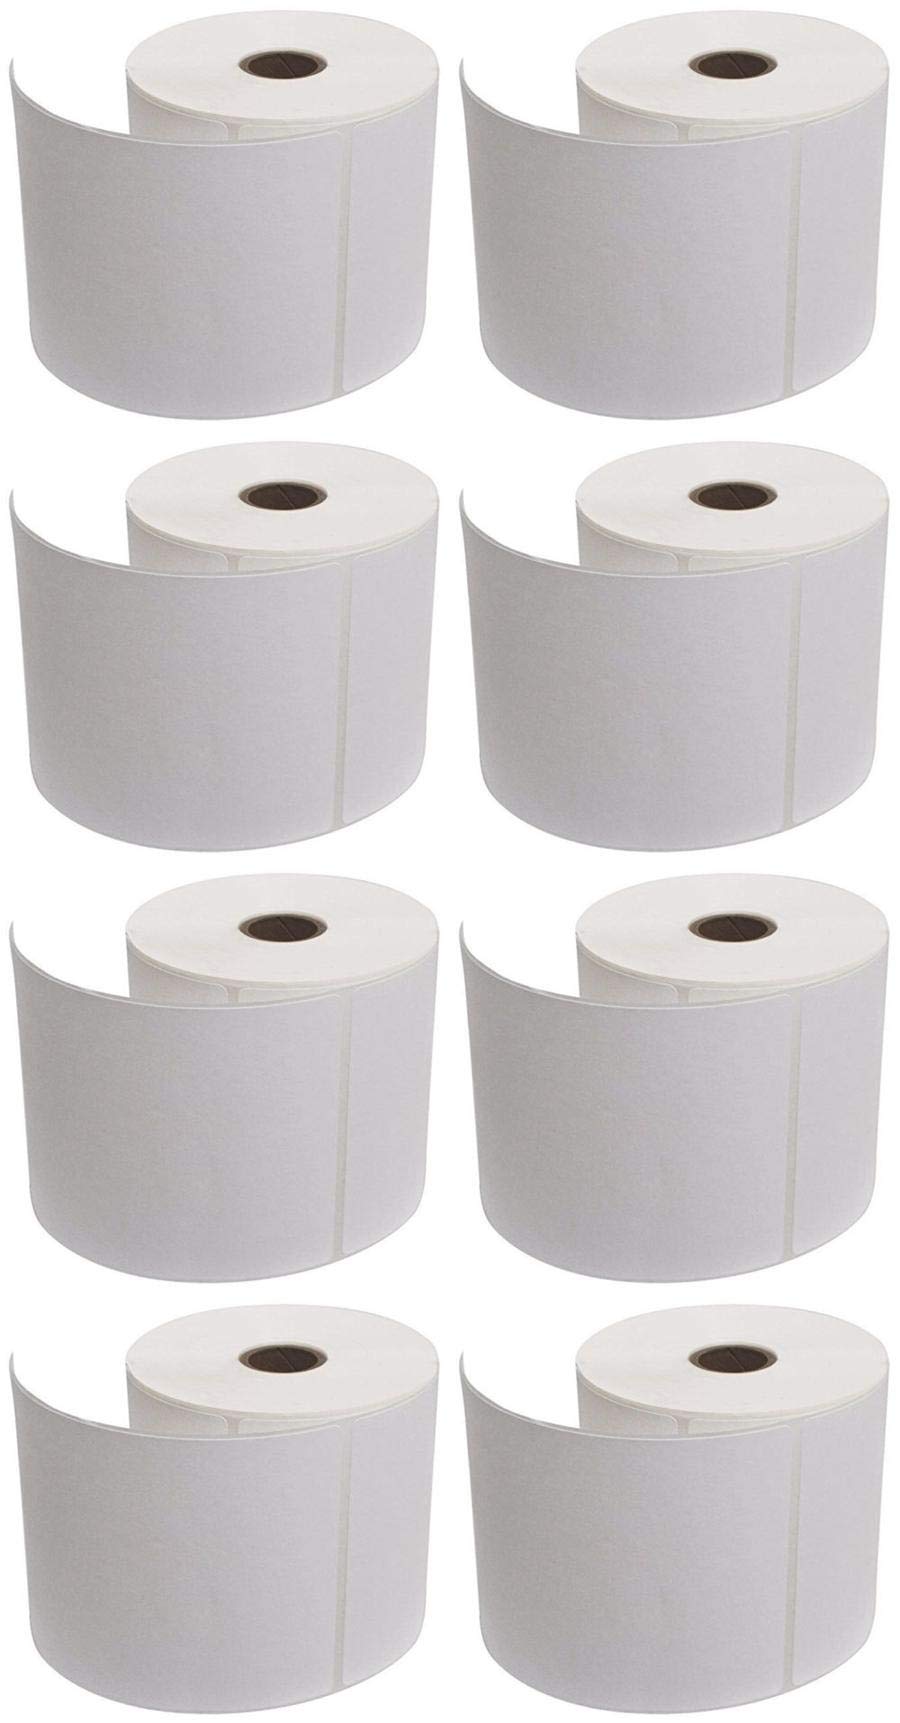 8 Rolls - Oknuu 4" x 6" 450 Labels/Roll Shipping Labels For Thermal Printers, BPA Free, Strong Adhesive, Resistant To Scratches and Smudges...